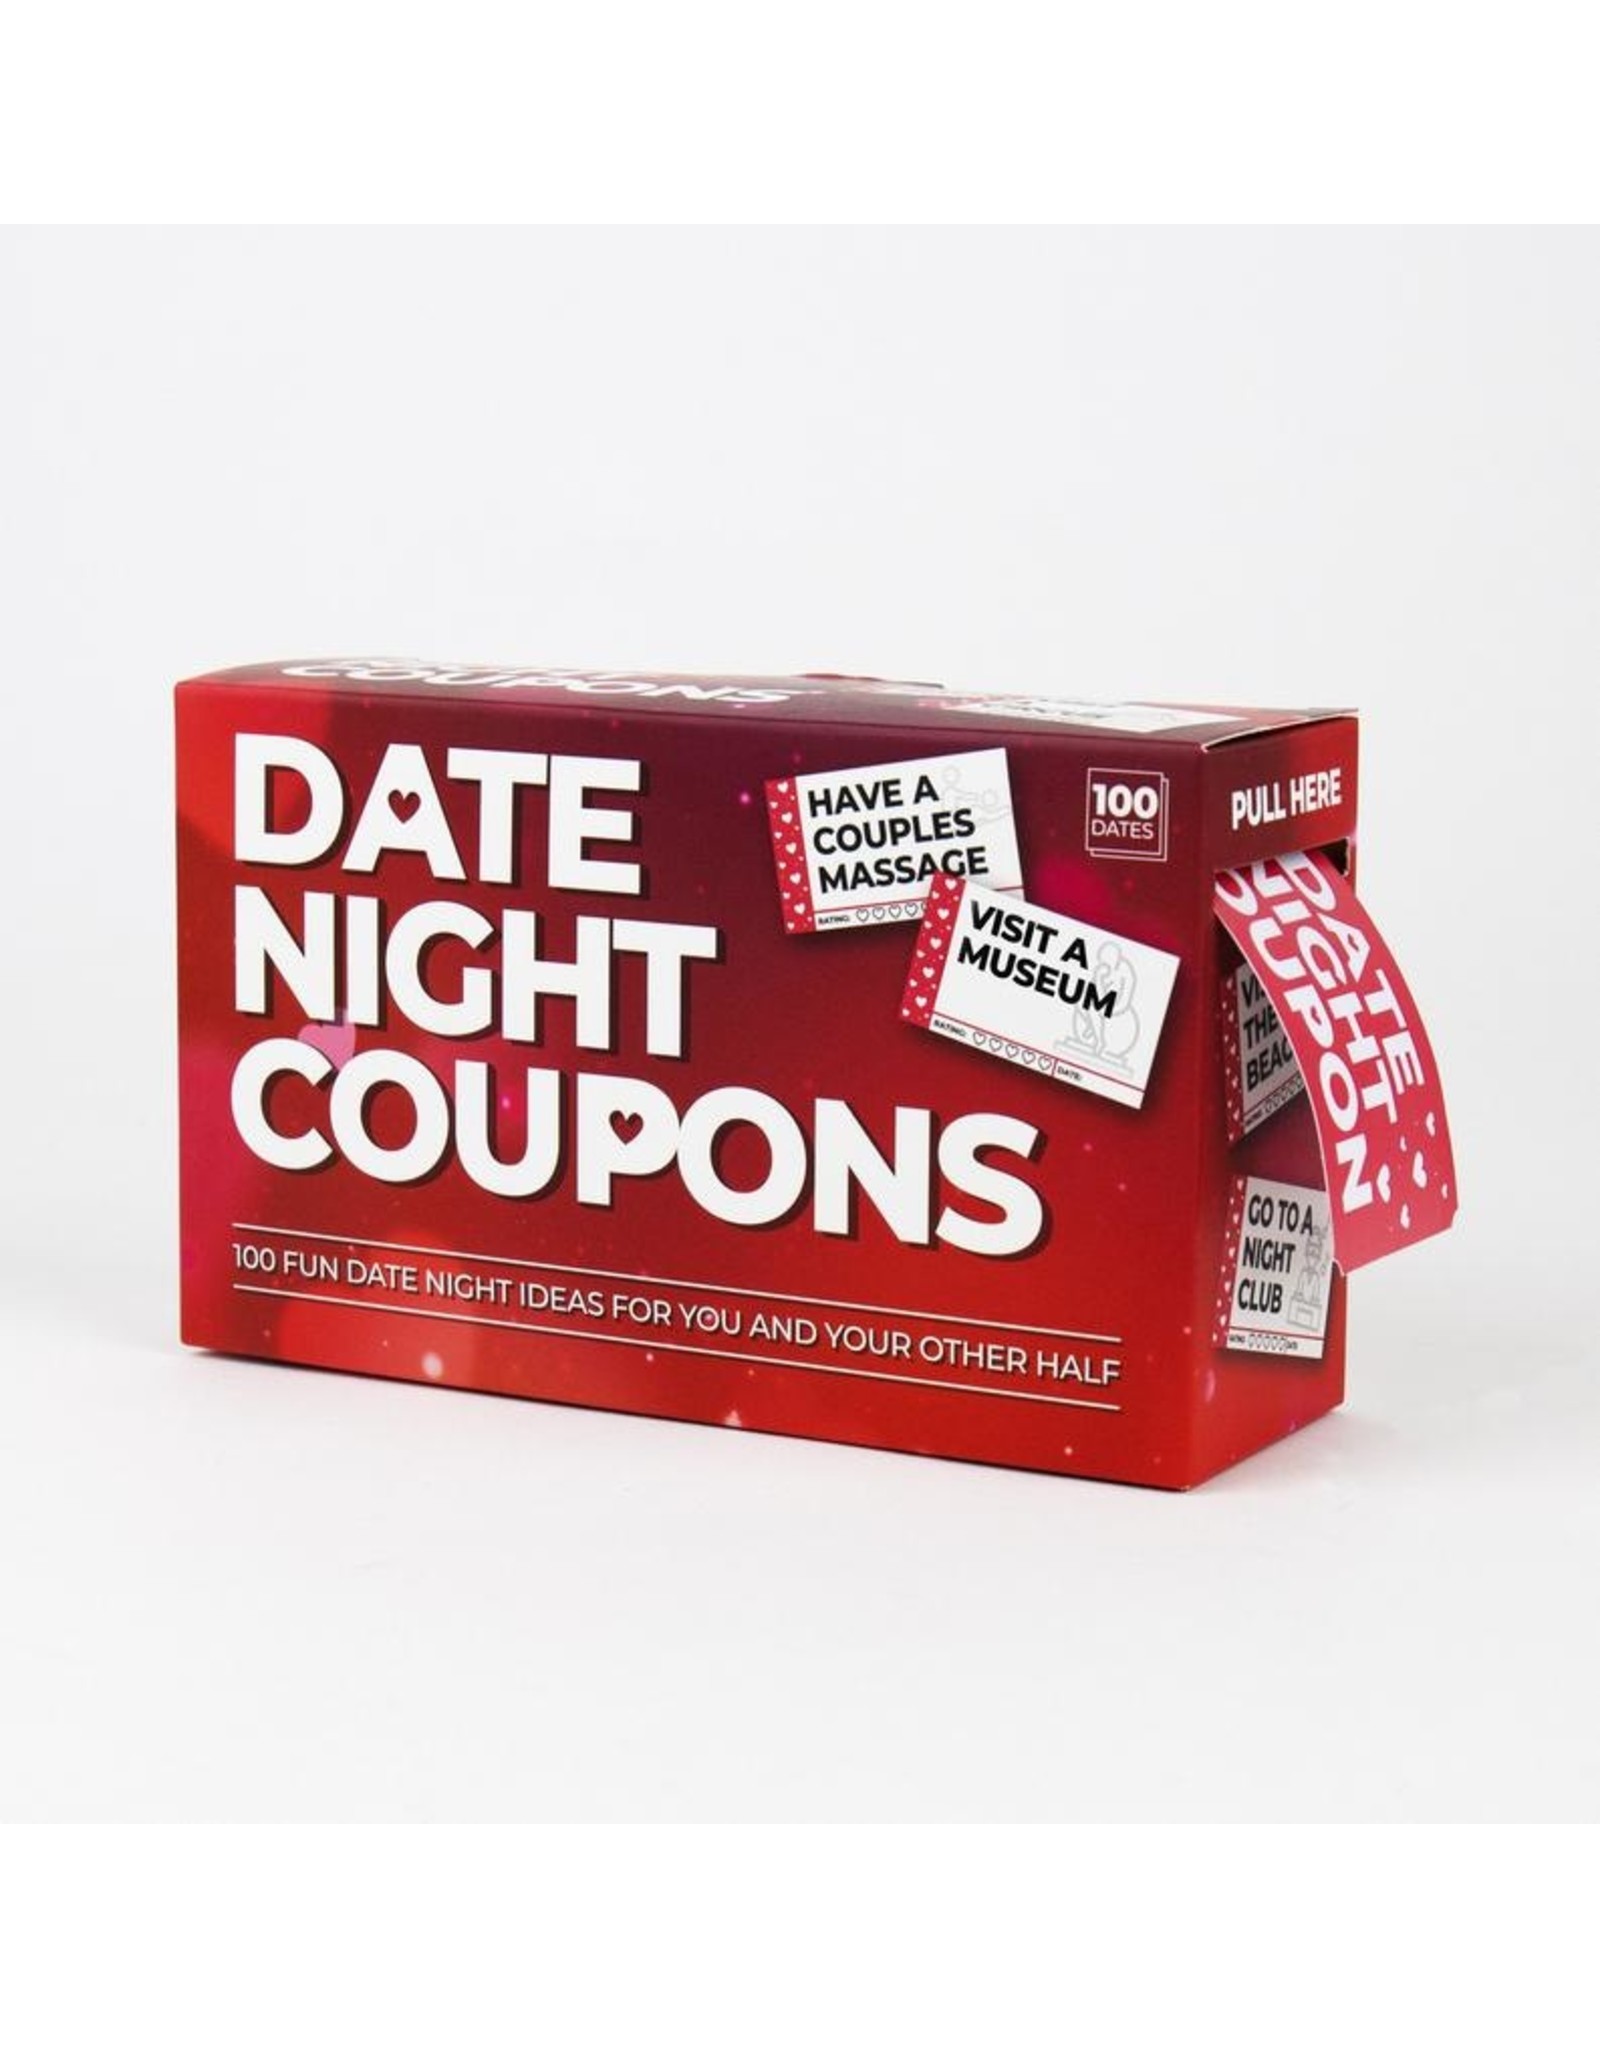 Coupons for date night